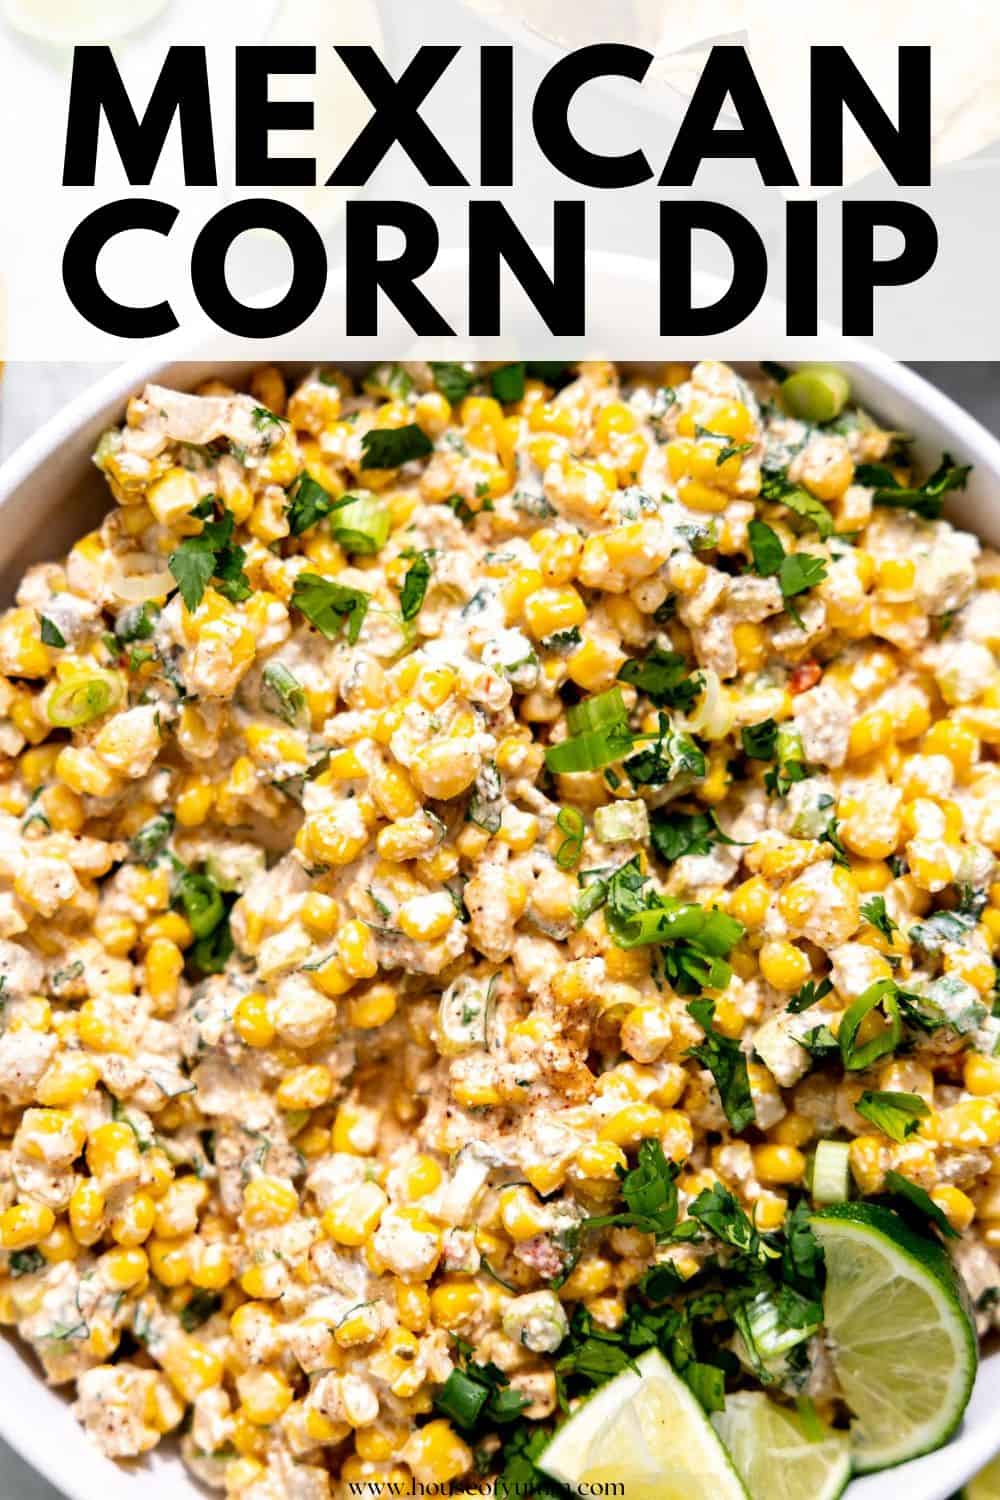 Mexican corn dip with text.